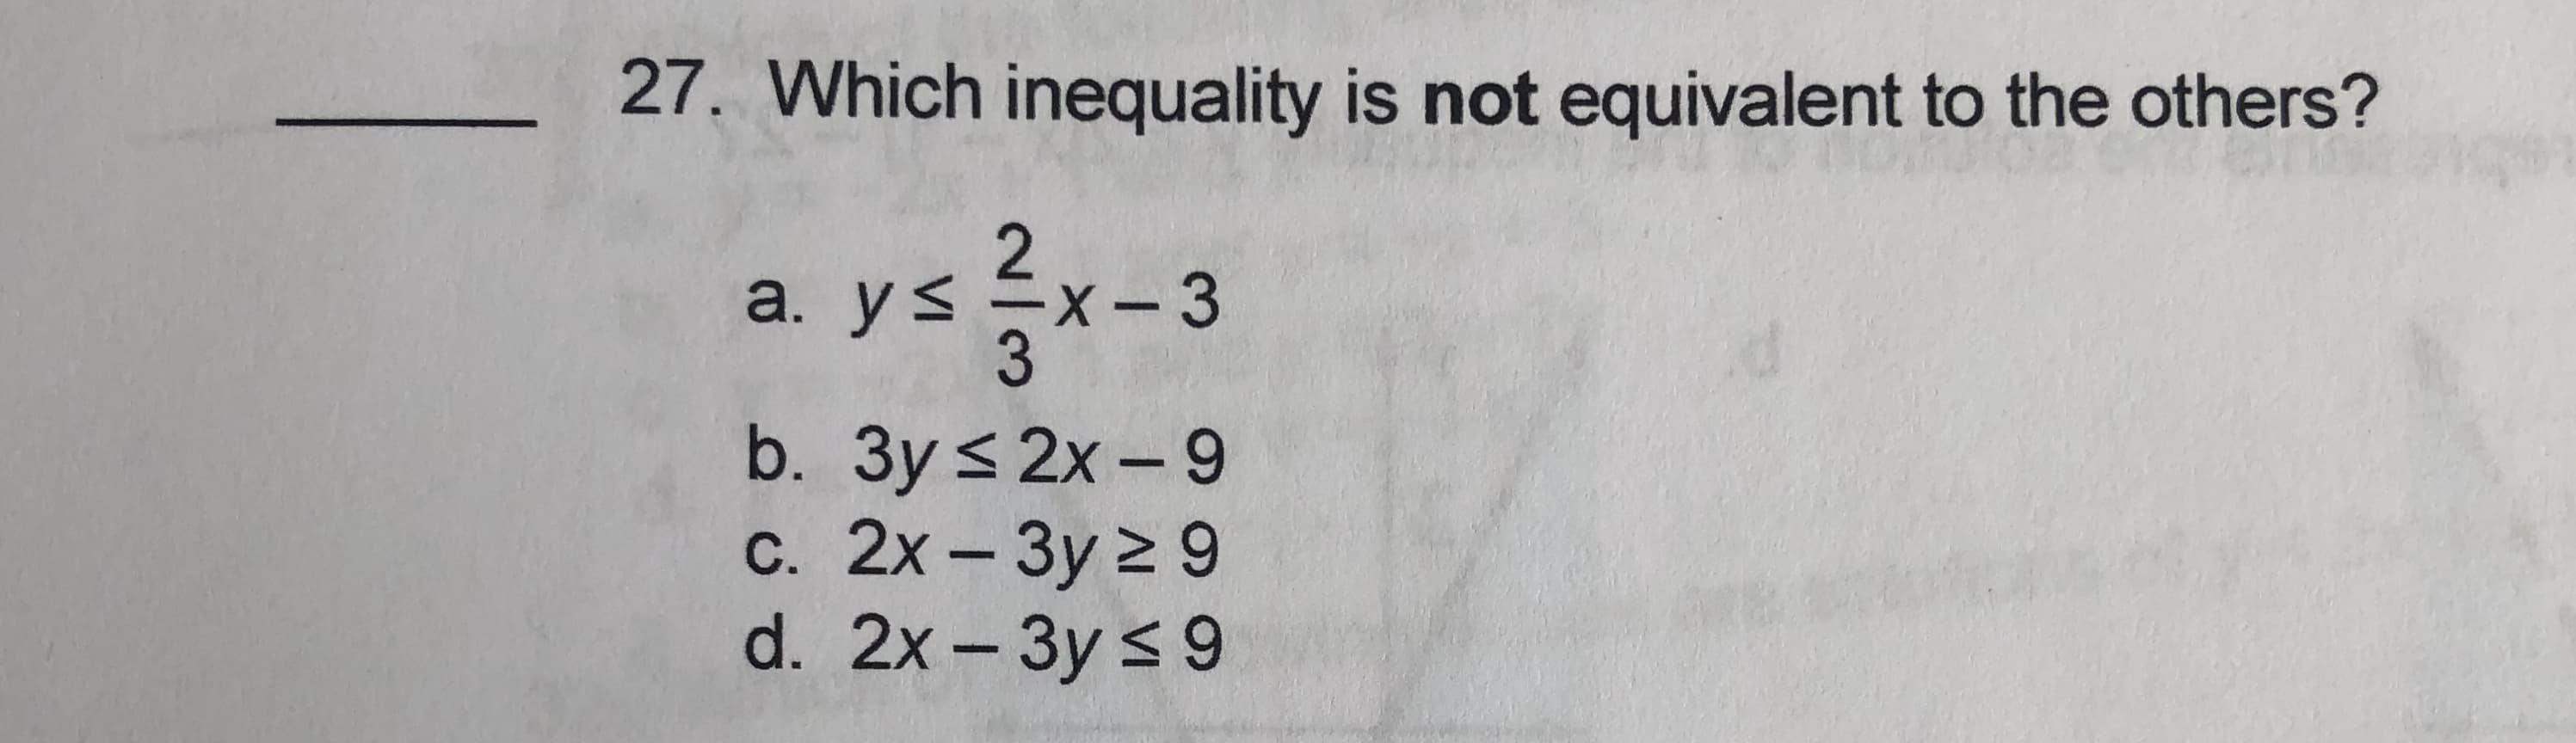 Which inequality is not equivalent to the others?
a. y< =x
- 3
b. Зy <2x-9
с. 2х - Зу 2 9
d. 2x -3y < 9
|
